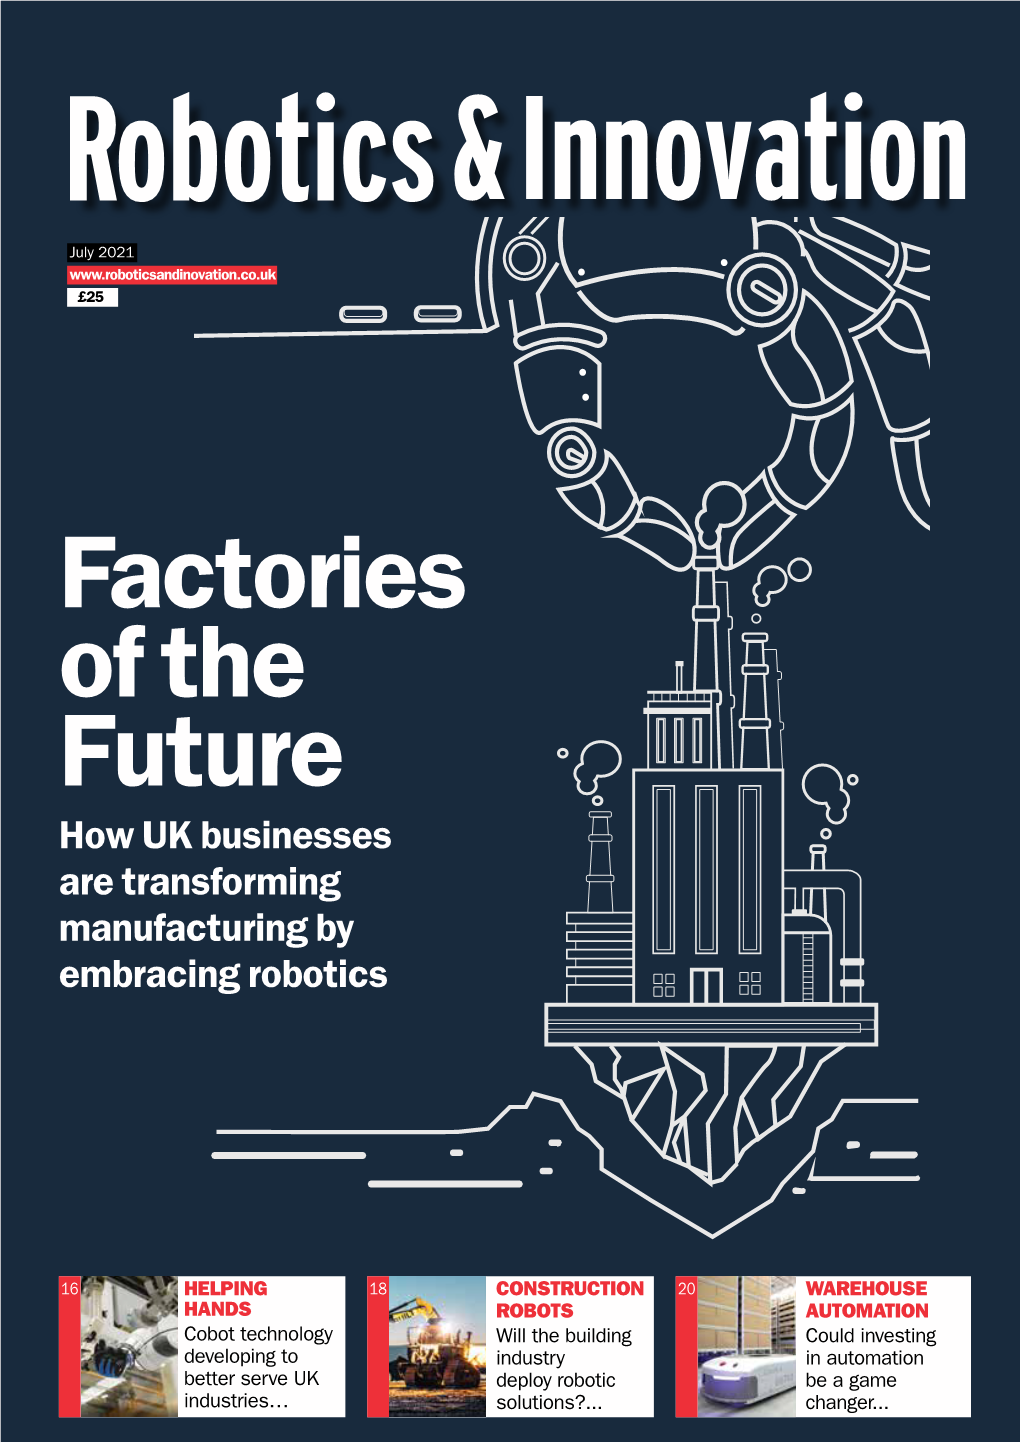 Factories of the Future How UK Businesses Are Transforming Manufacturing by Embracing Robotics